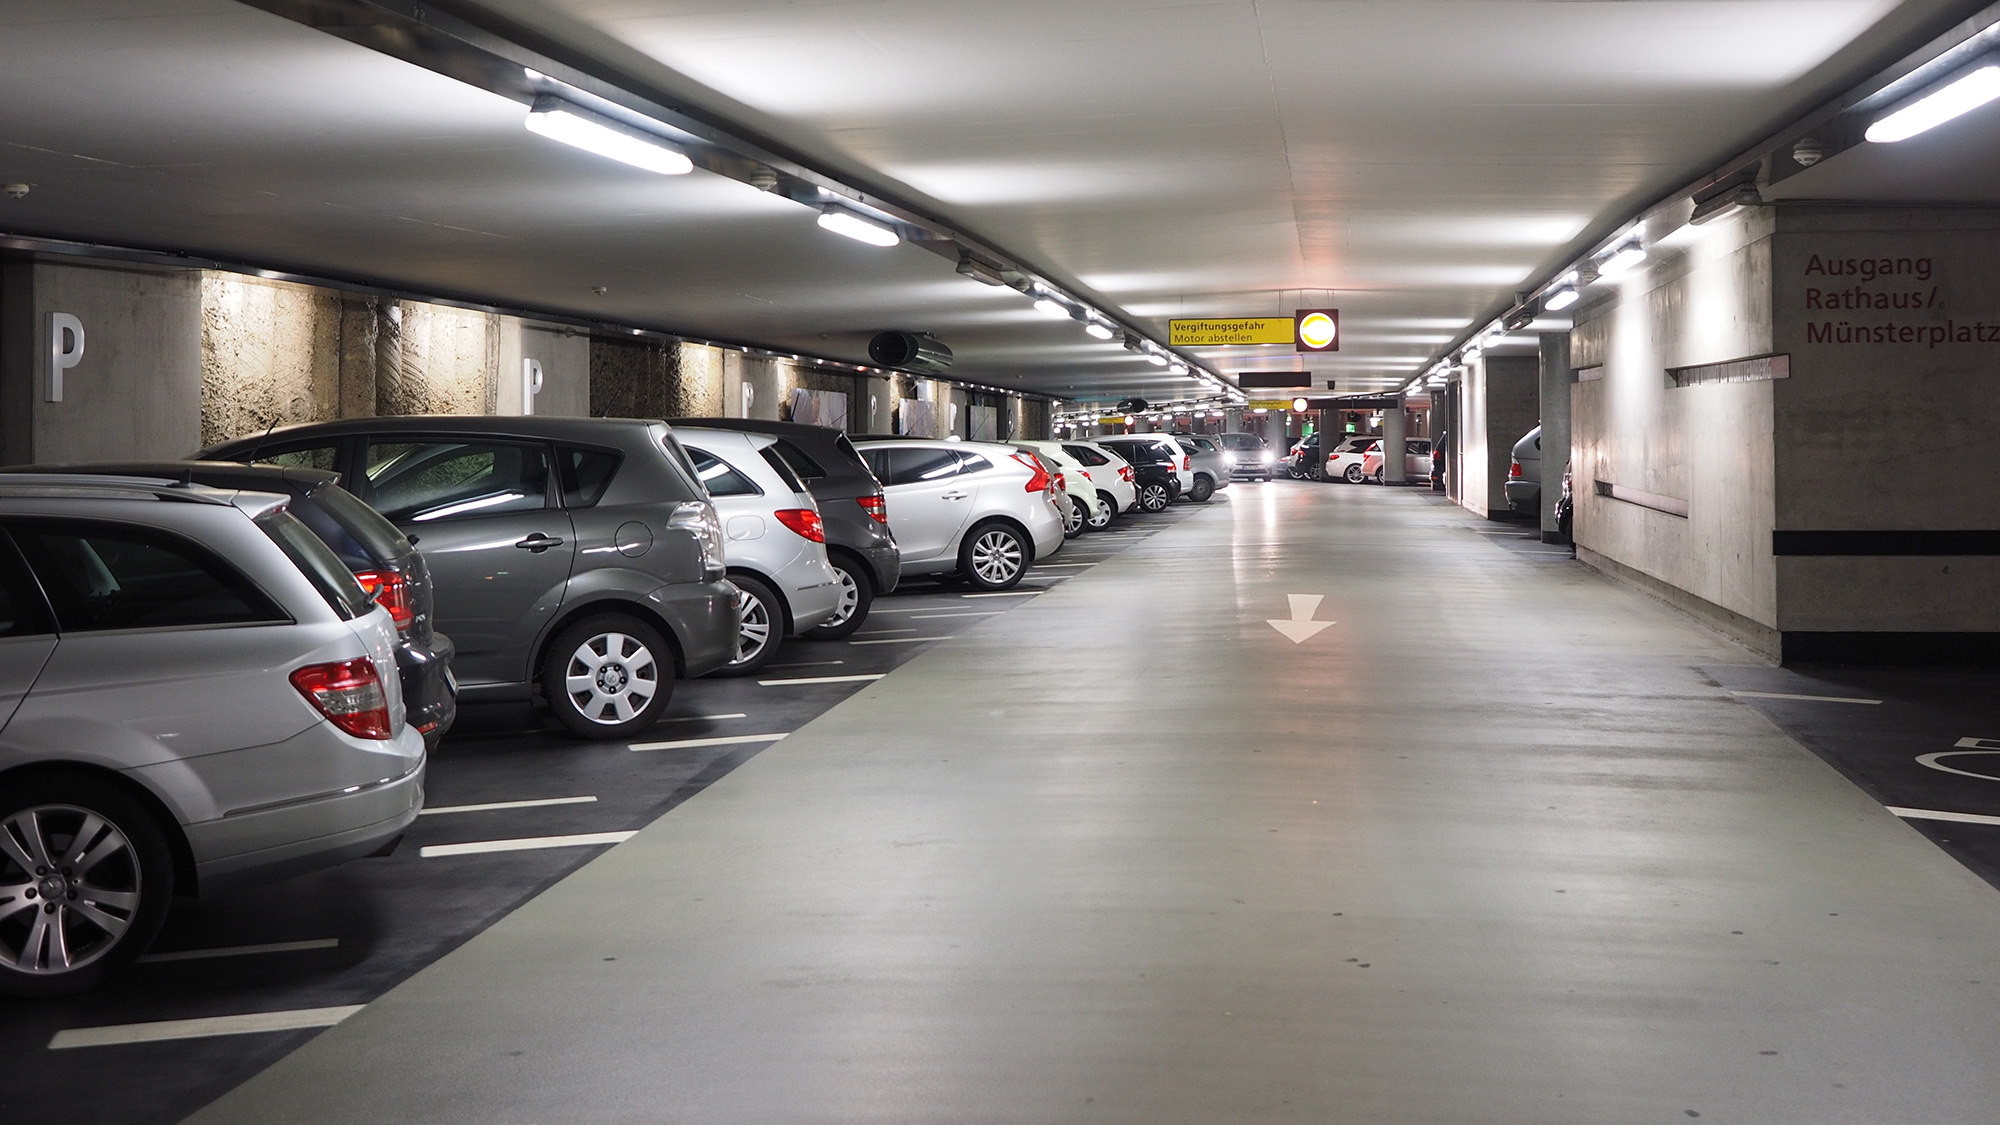 https://www.thenbs.com/-/media/uk/new-images/by-section/knowledge/knowledge-articles-hero/multi-storey-car-park.jpg